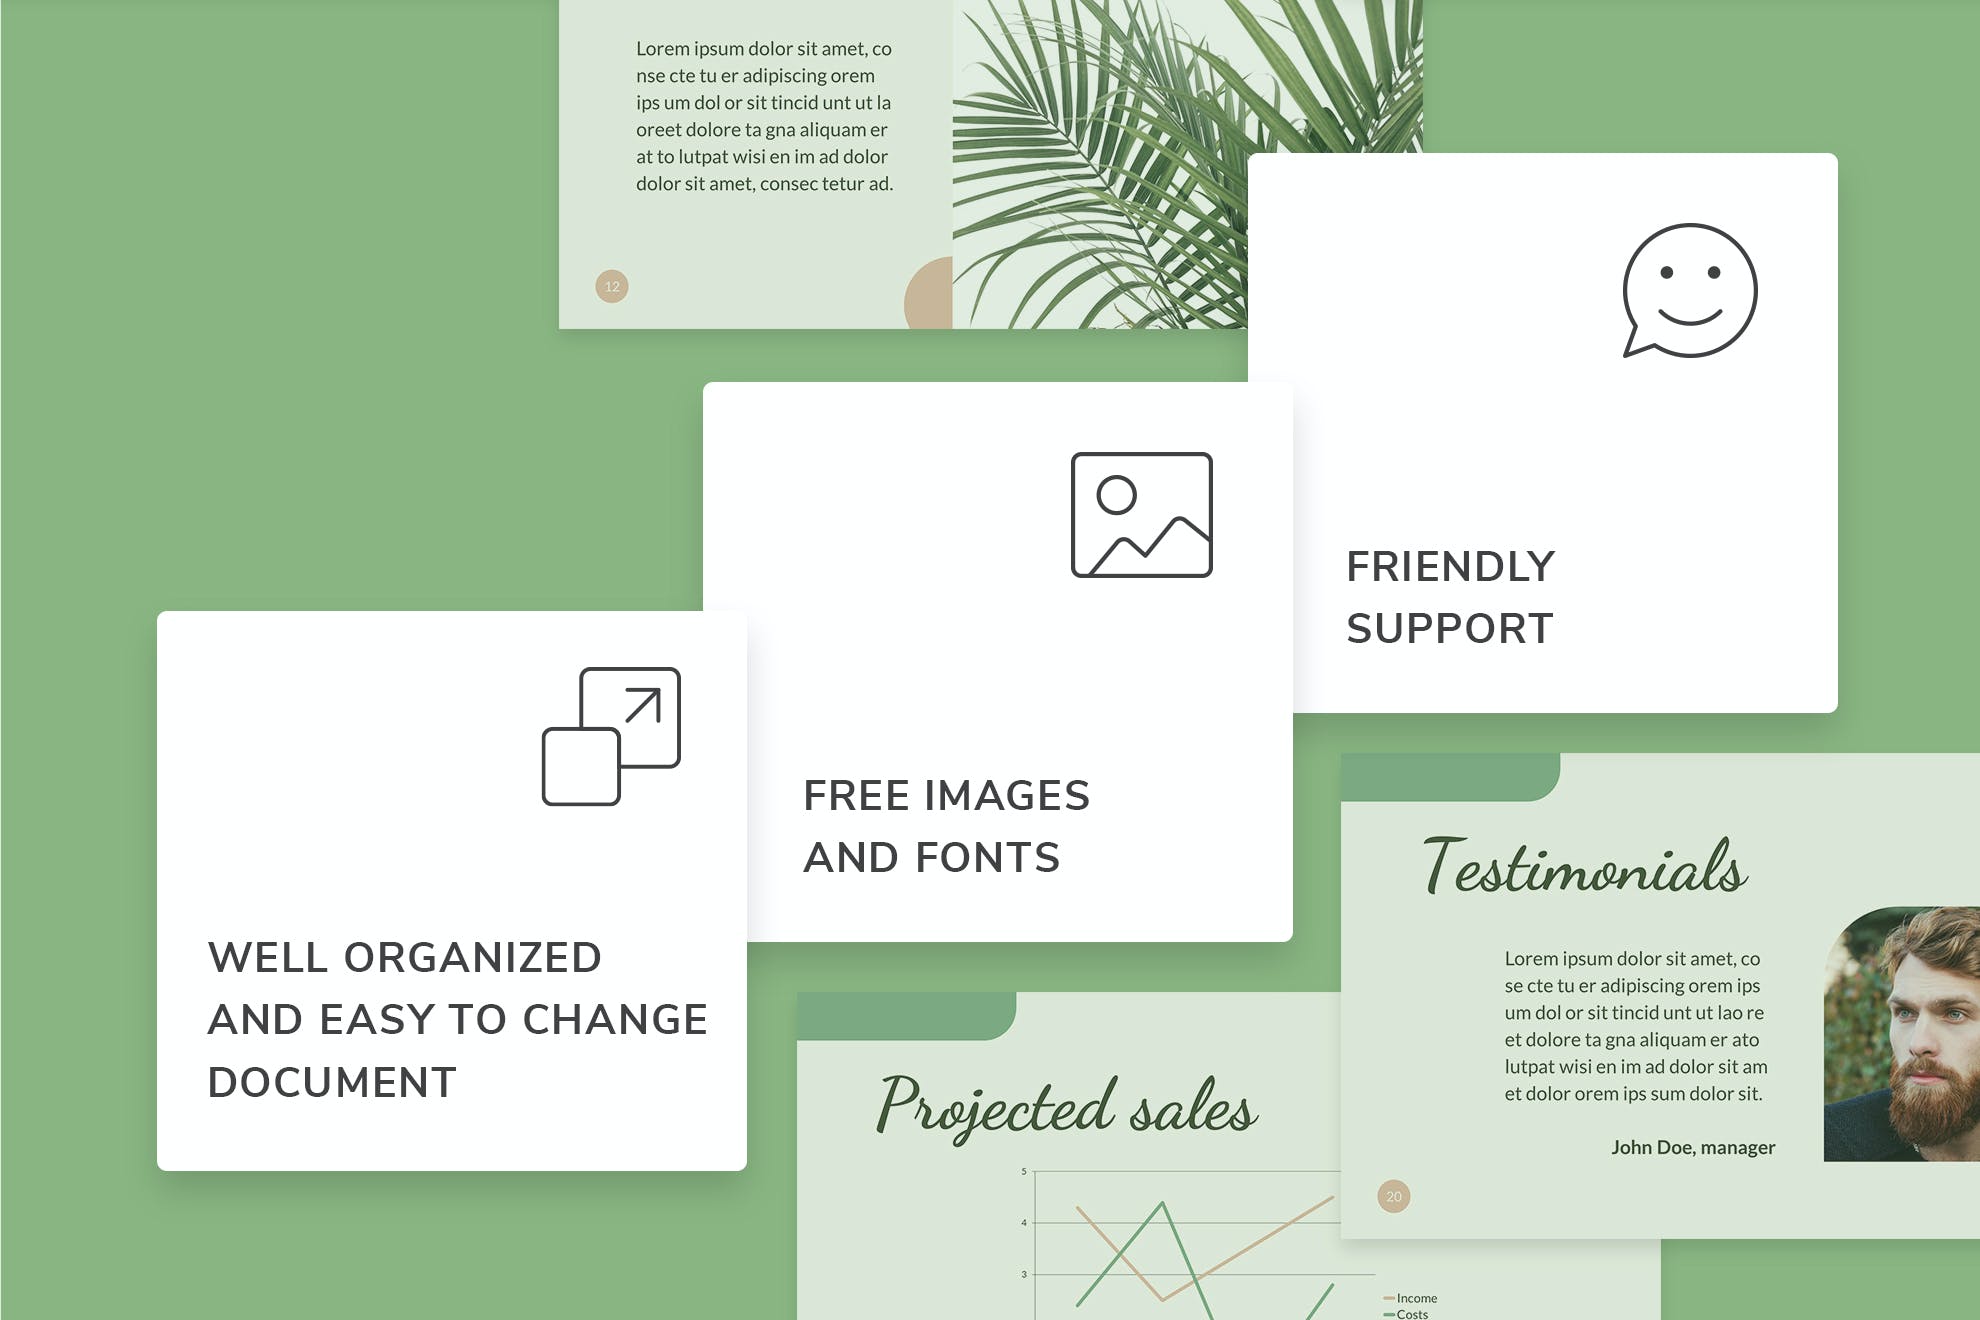 This is a well organized and easy to change document with free images and fonts.